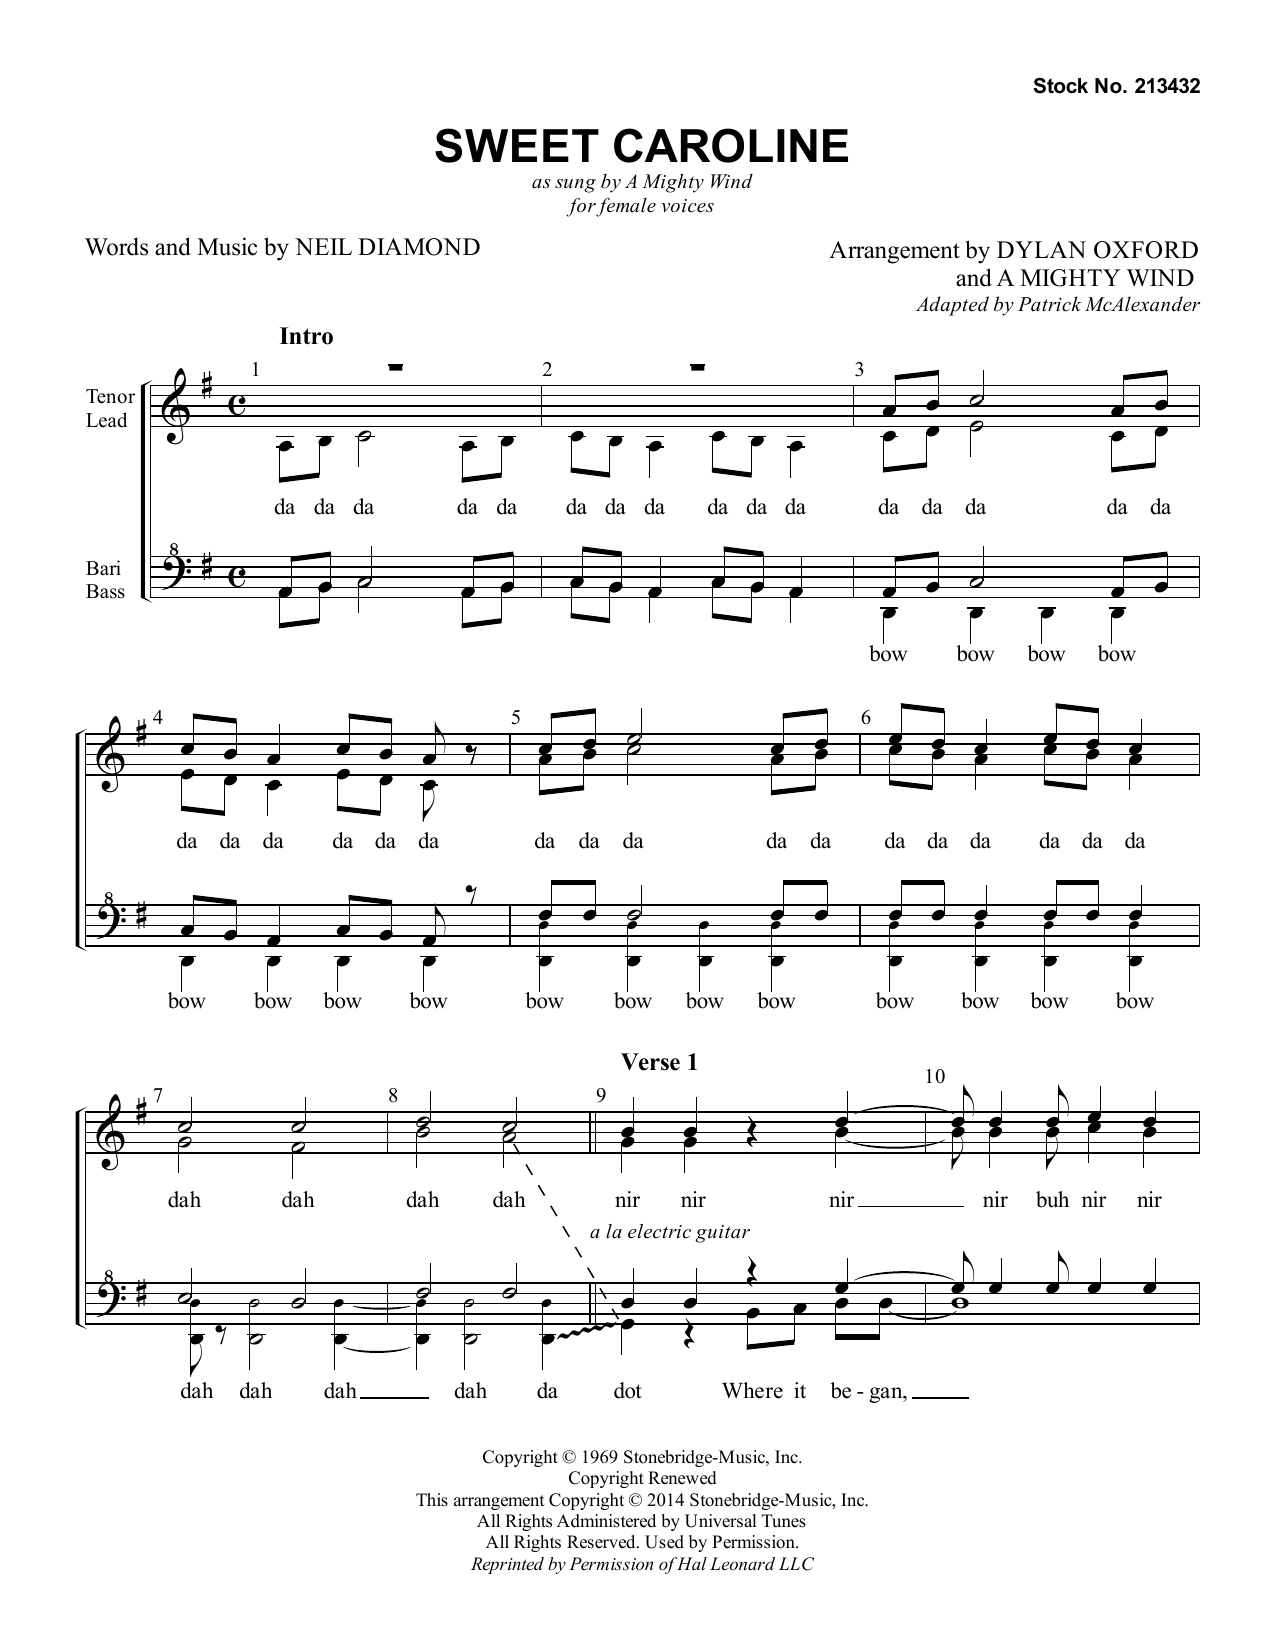 A Mighty Wind Sweet Caroline (arr. Dylan Oxford & A Mighty Wind) sheet music notes and chords. Download Printable PDF.